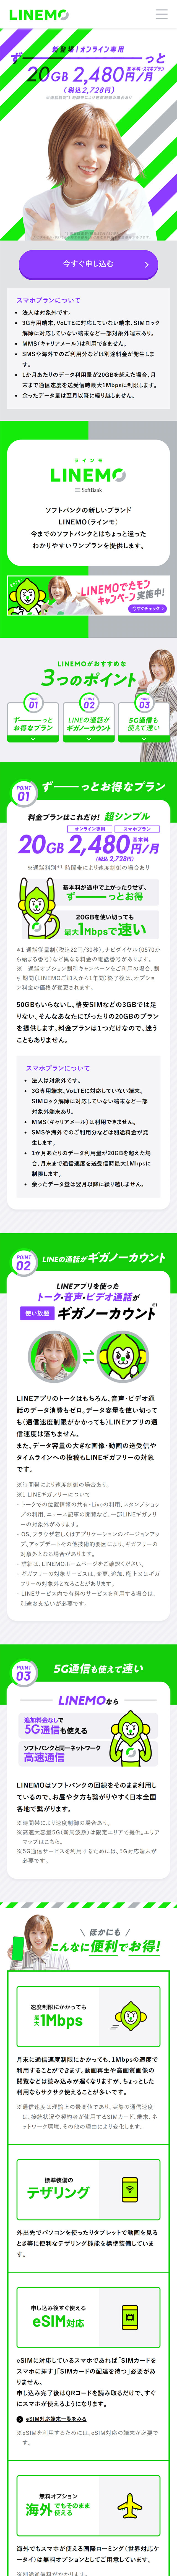 LINEMO_sp_1